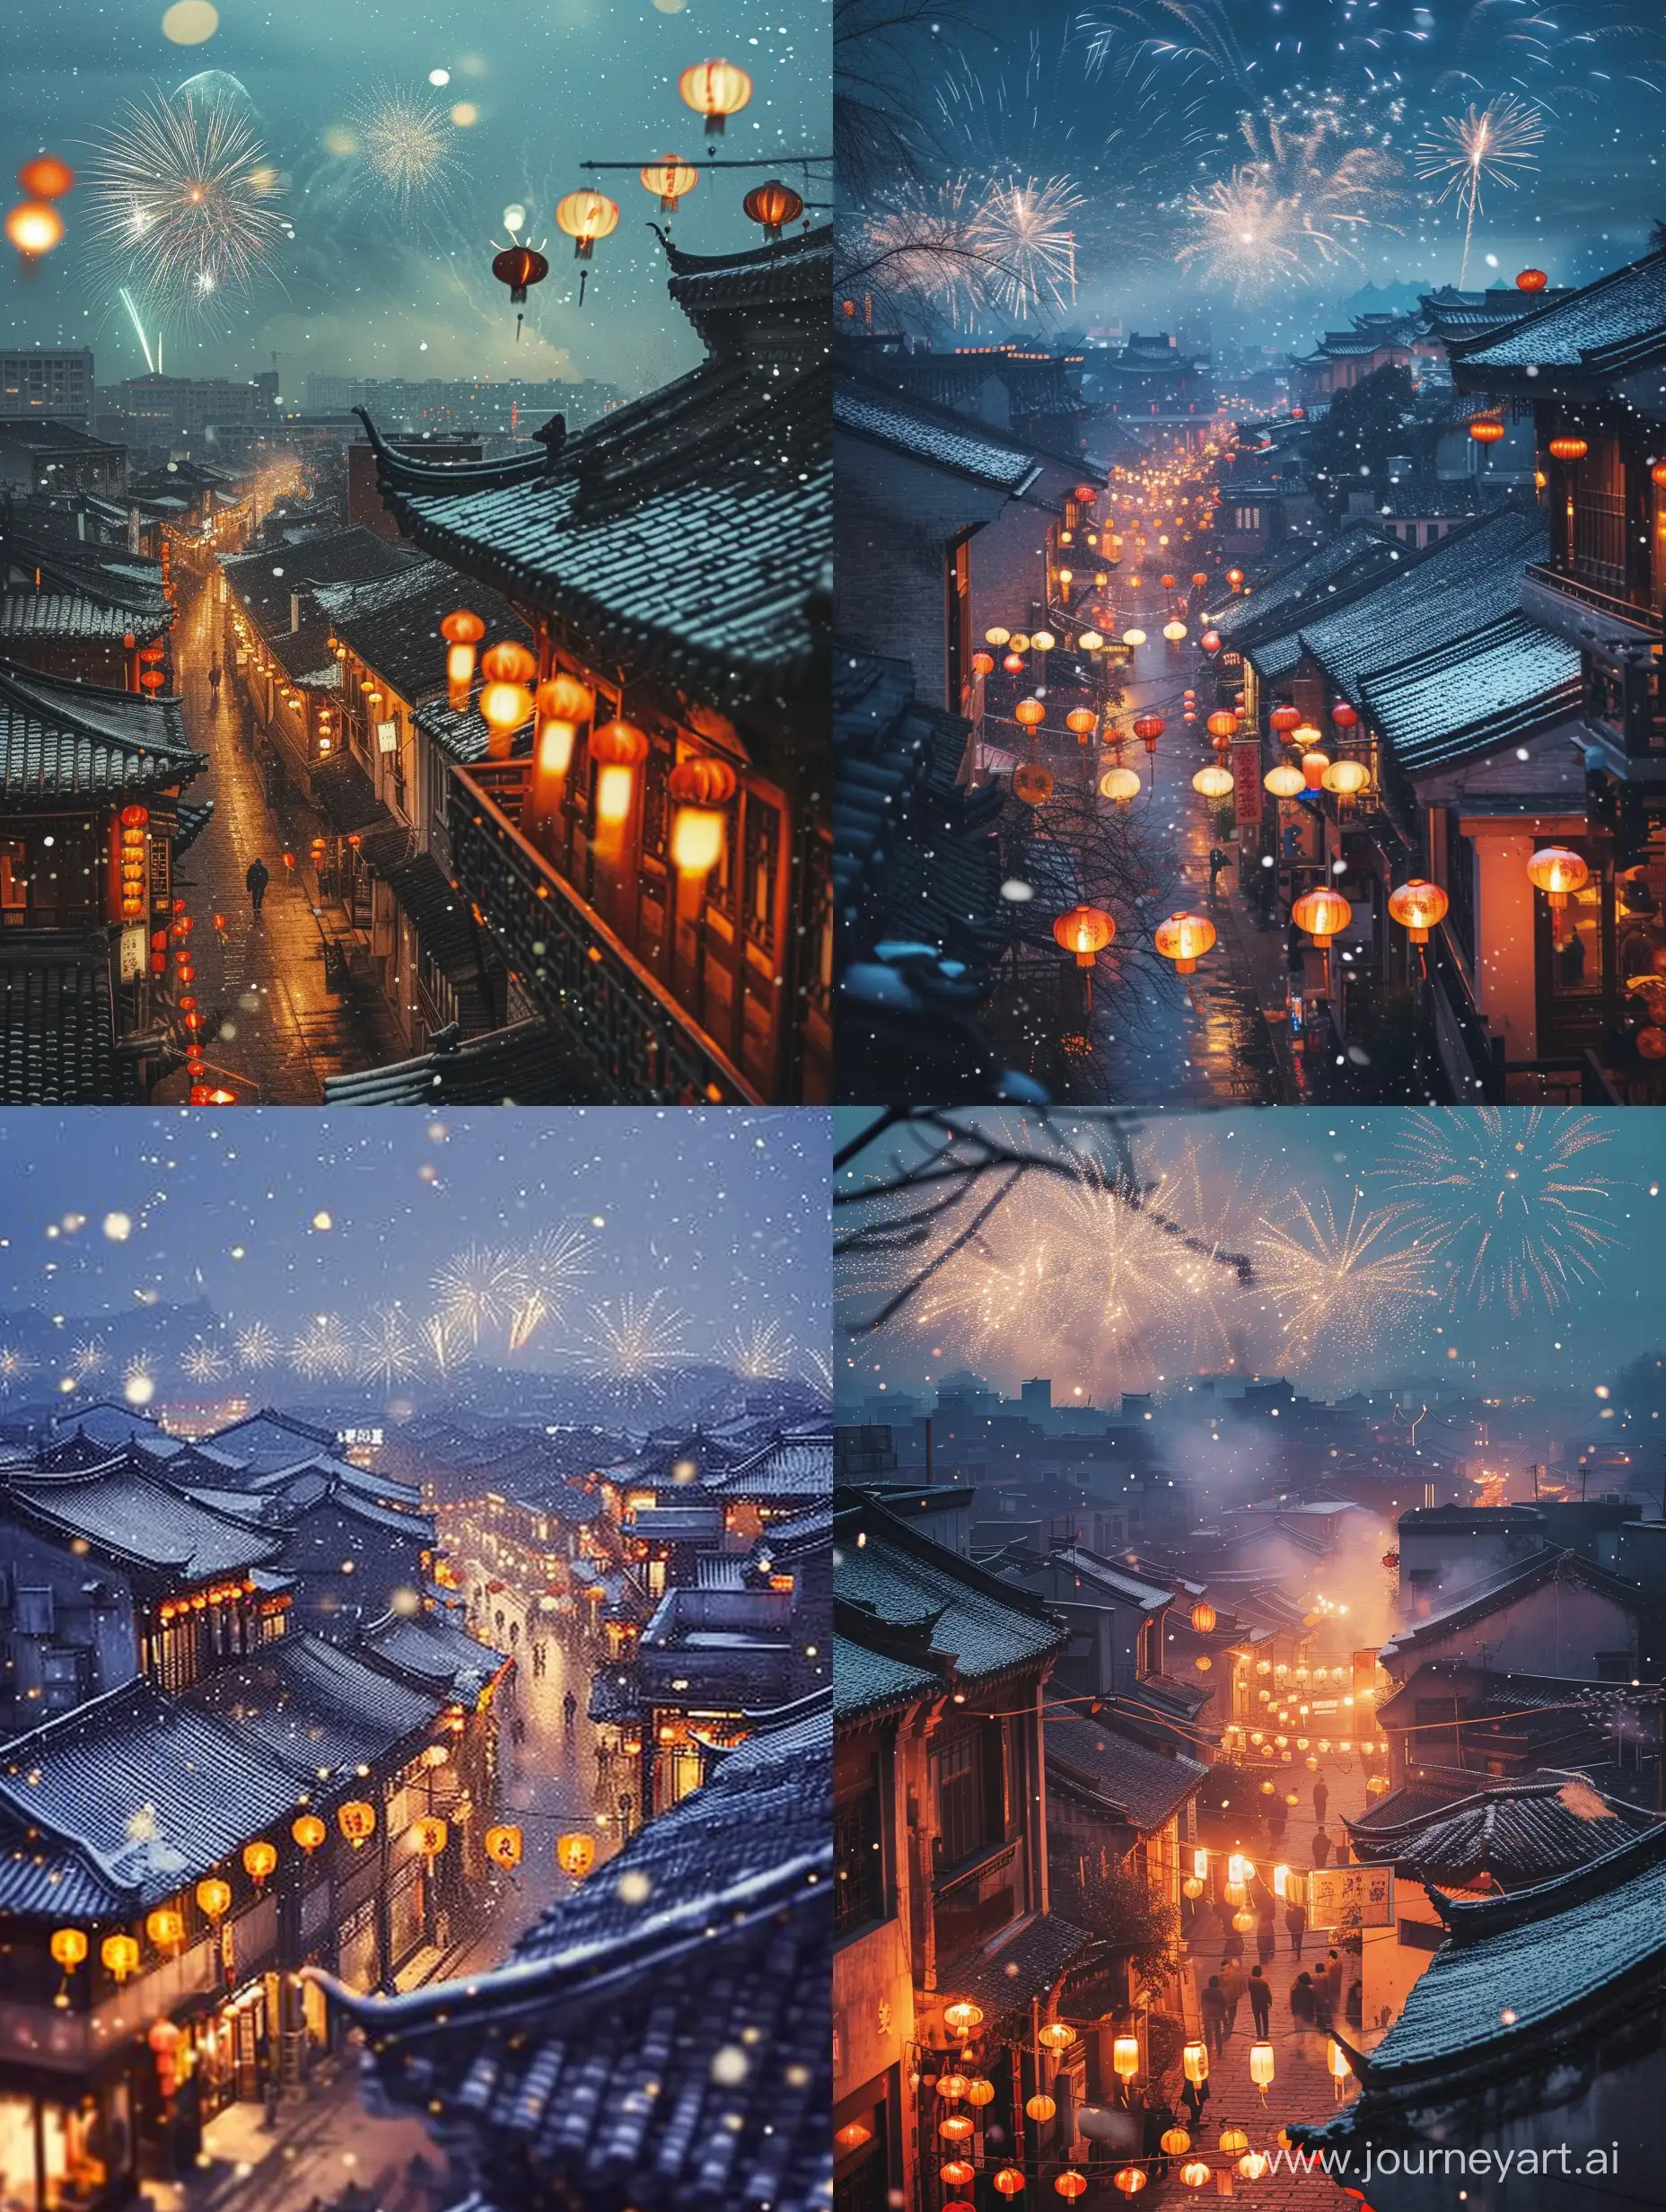 Vibrant-Chinese-New-Year-Celebration-Nighttime-Lanterns-SnowDusted-Rooftops-and-Spectacular-Fireworks